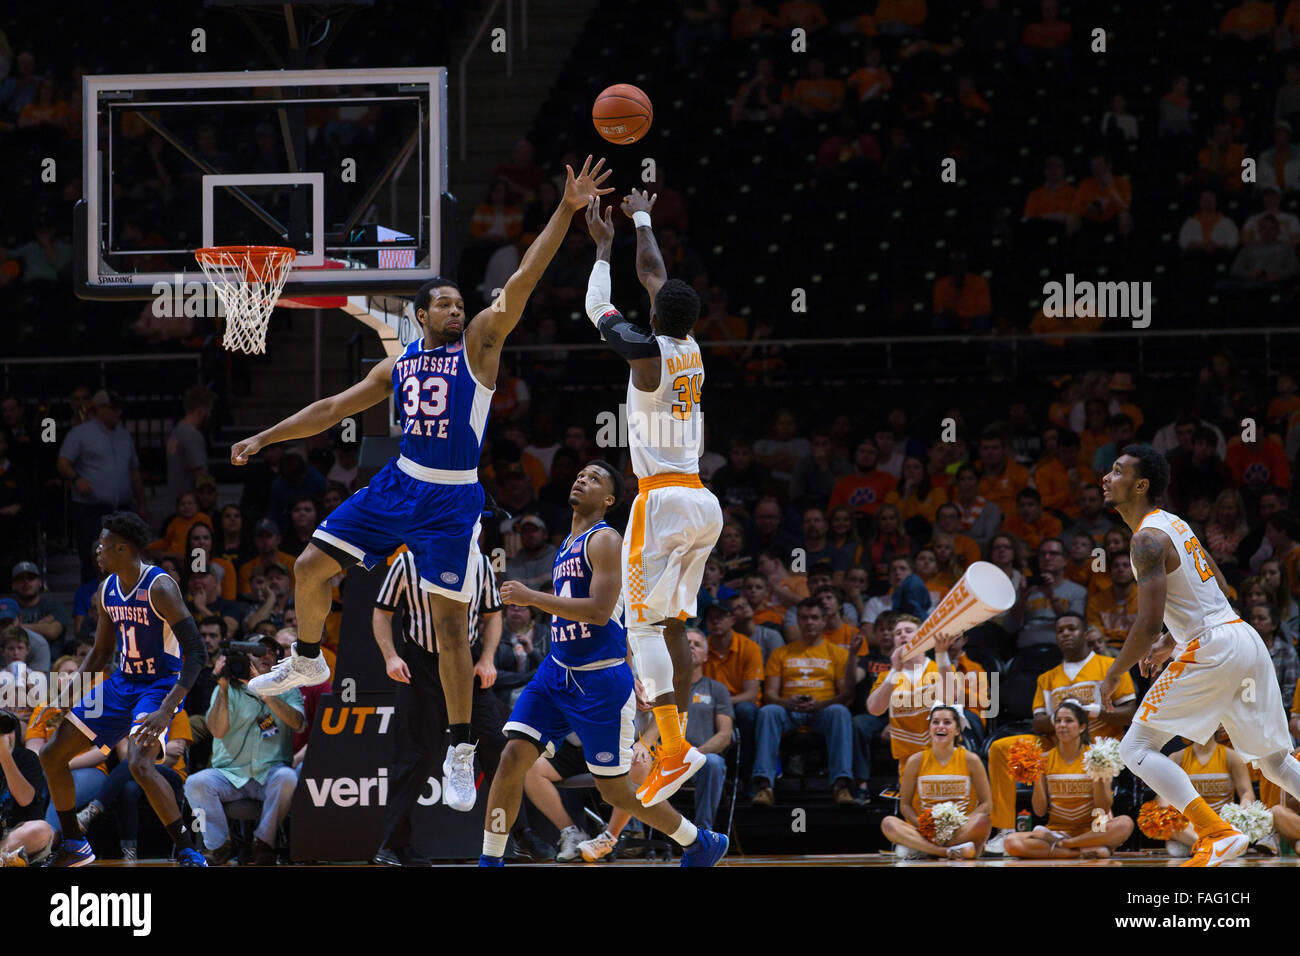 Knoxville, Tennessee, USA. 29th Dec, 2015. Devon Baulkman #34 of the Tennessee Volunteers shoots the ball over Wayne Martin #33 of the Tennessee State Tigers during the NCAA basketball game between the University of Tennessee Volunteers and the Tennessee State University Tigers at Thompson Boling Arena in Knoxville TN  Credit:  Tim Gangloff/Cal Sport Media/Alamy Live News Stock Photo